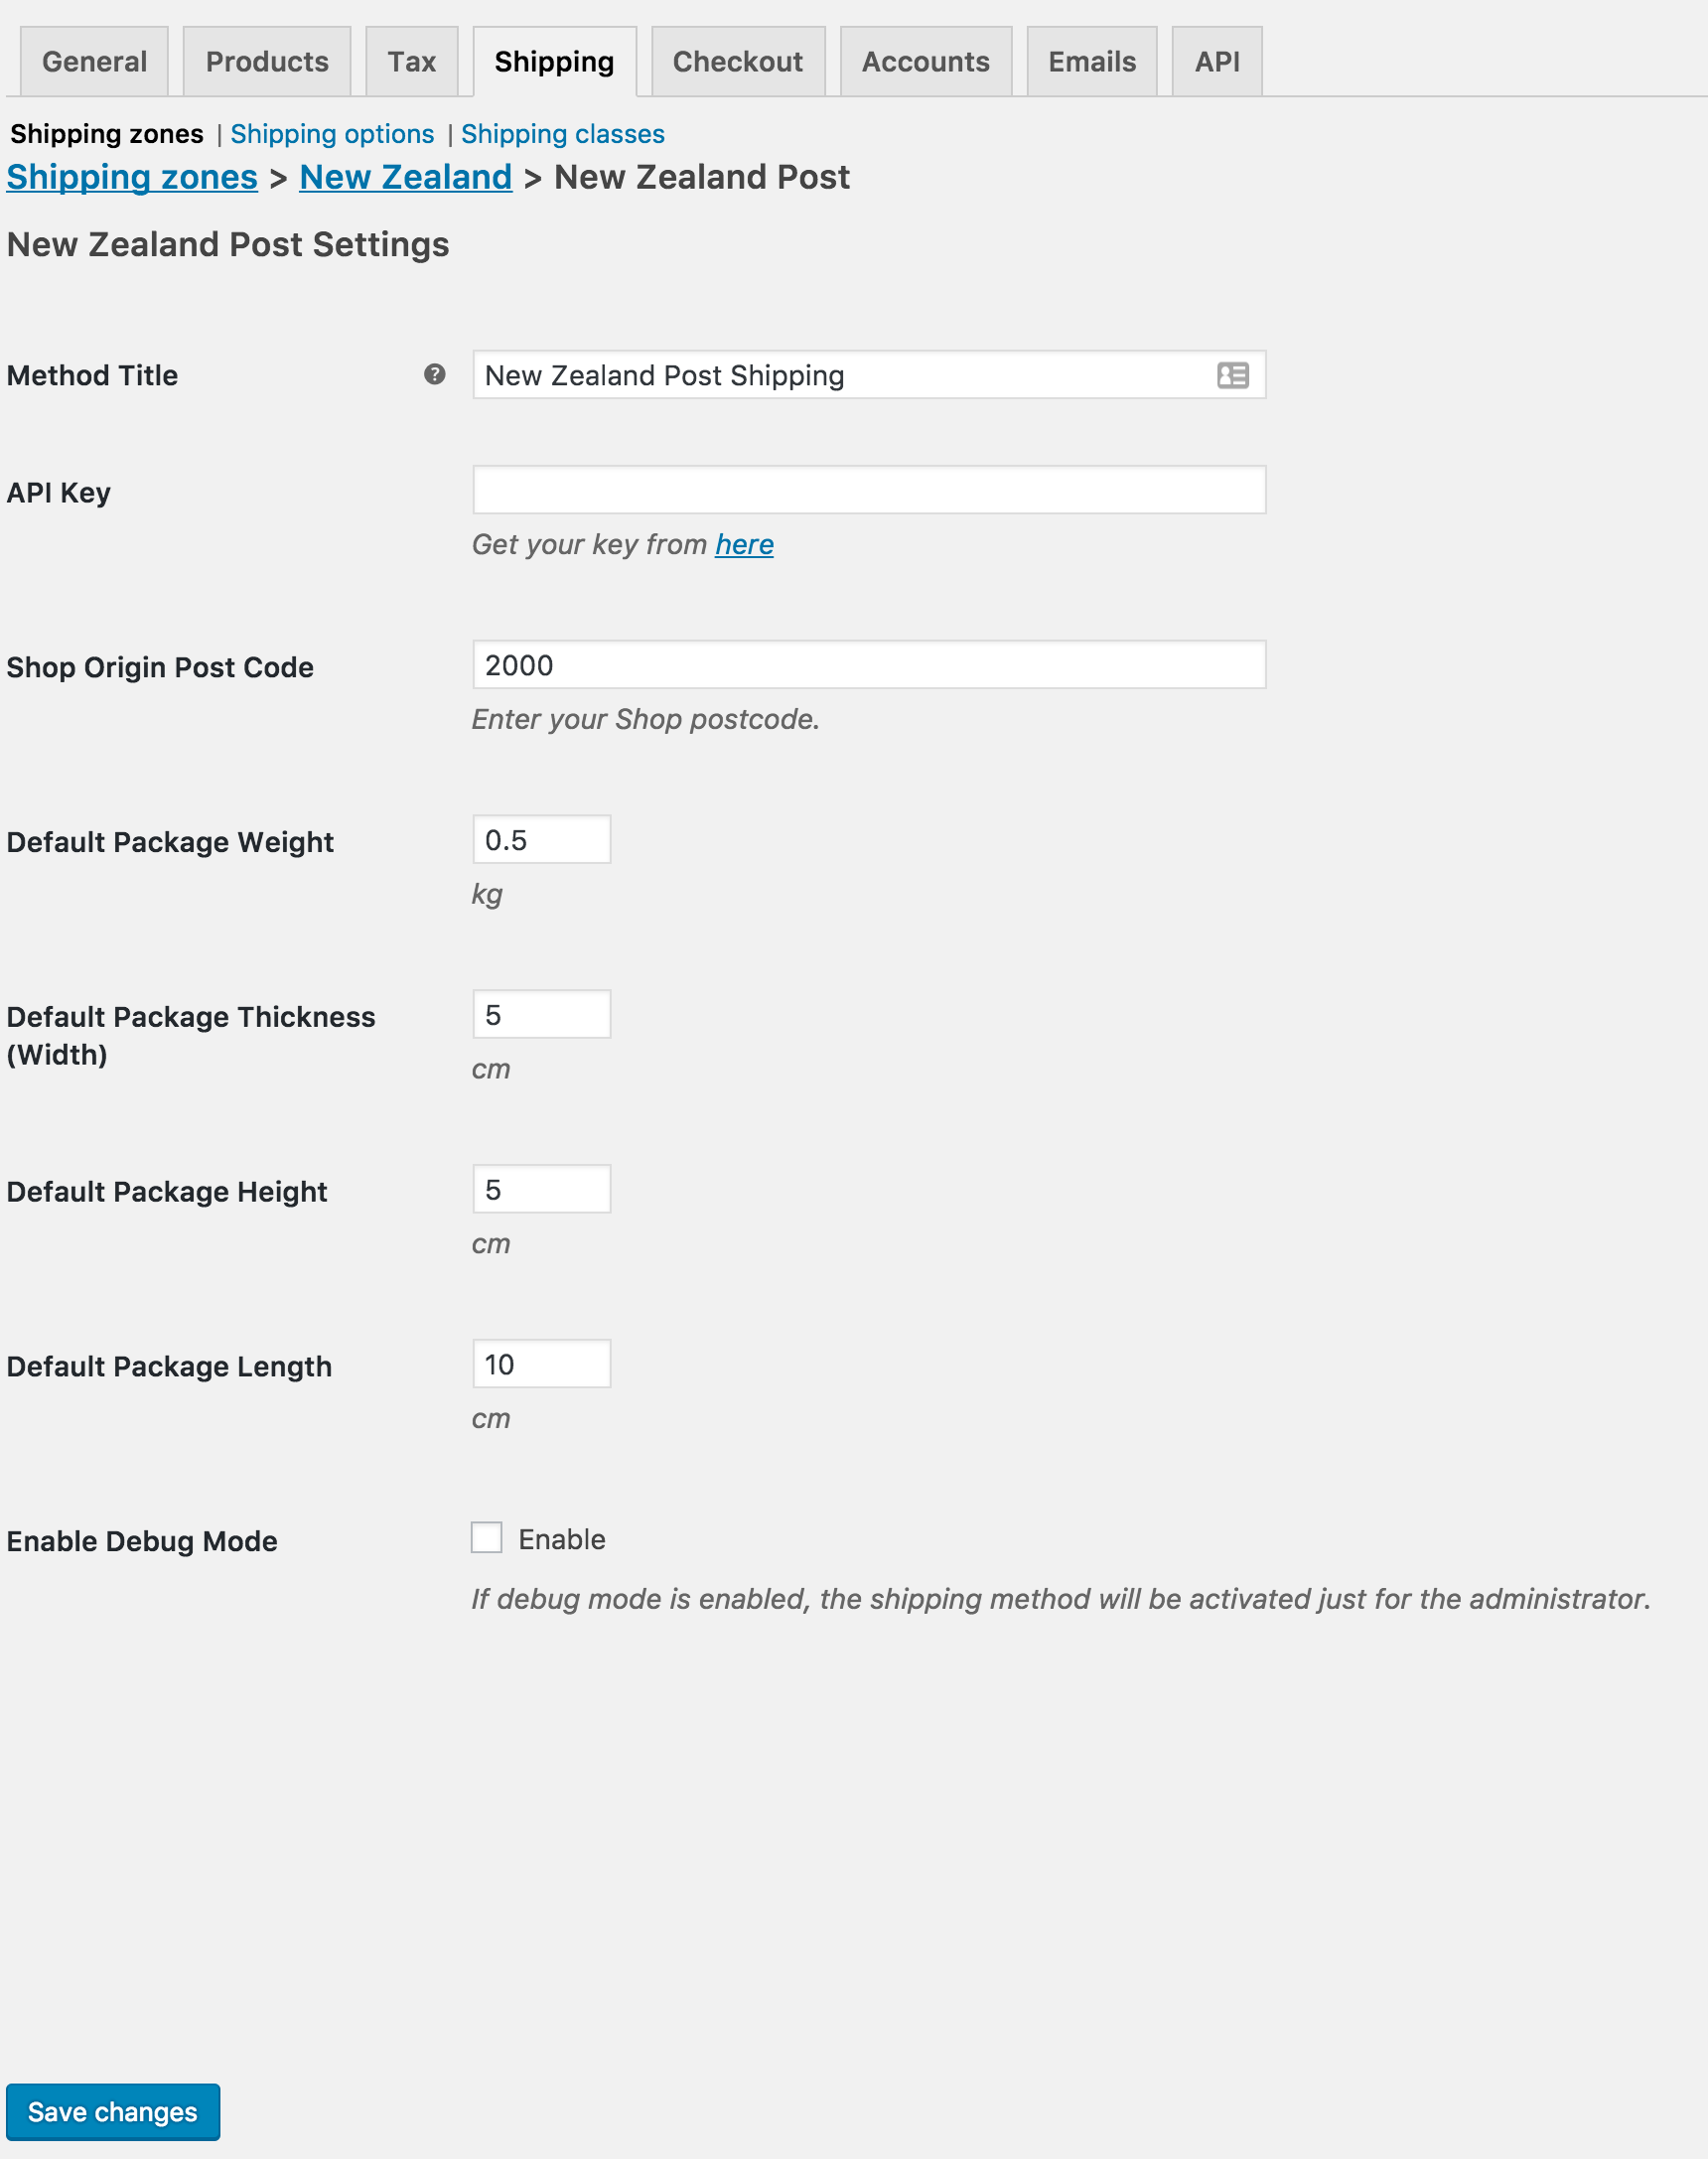 New Zealand Post Shipping Settings Page.